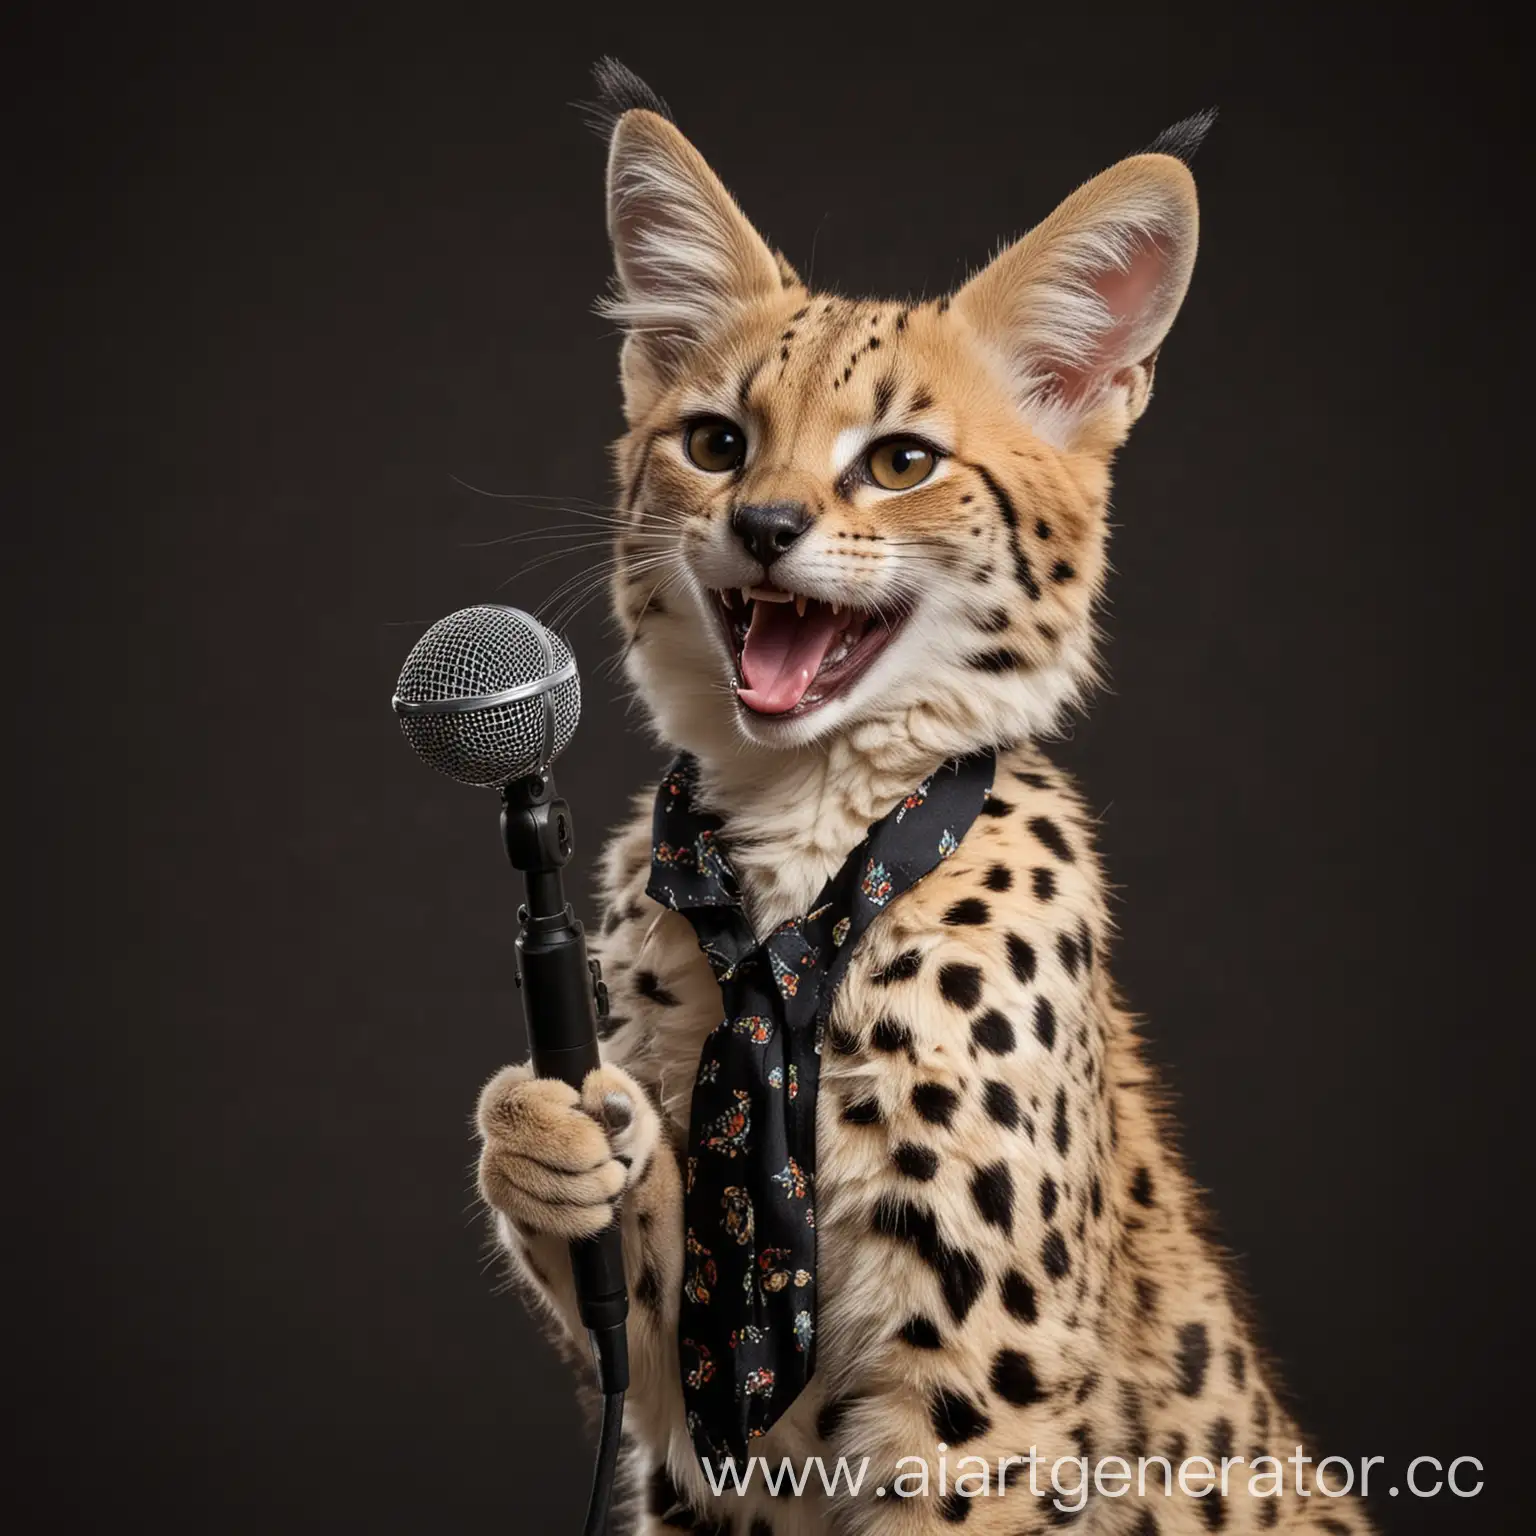 Smiling-Serval-Cat-in-Clothing-Performing-with-Microphone-on-Dark-Background